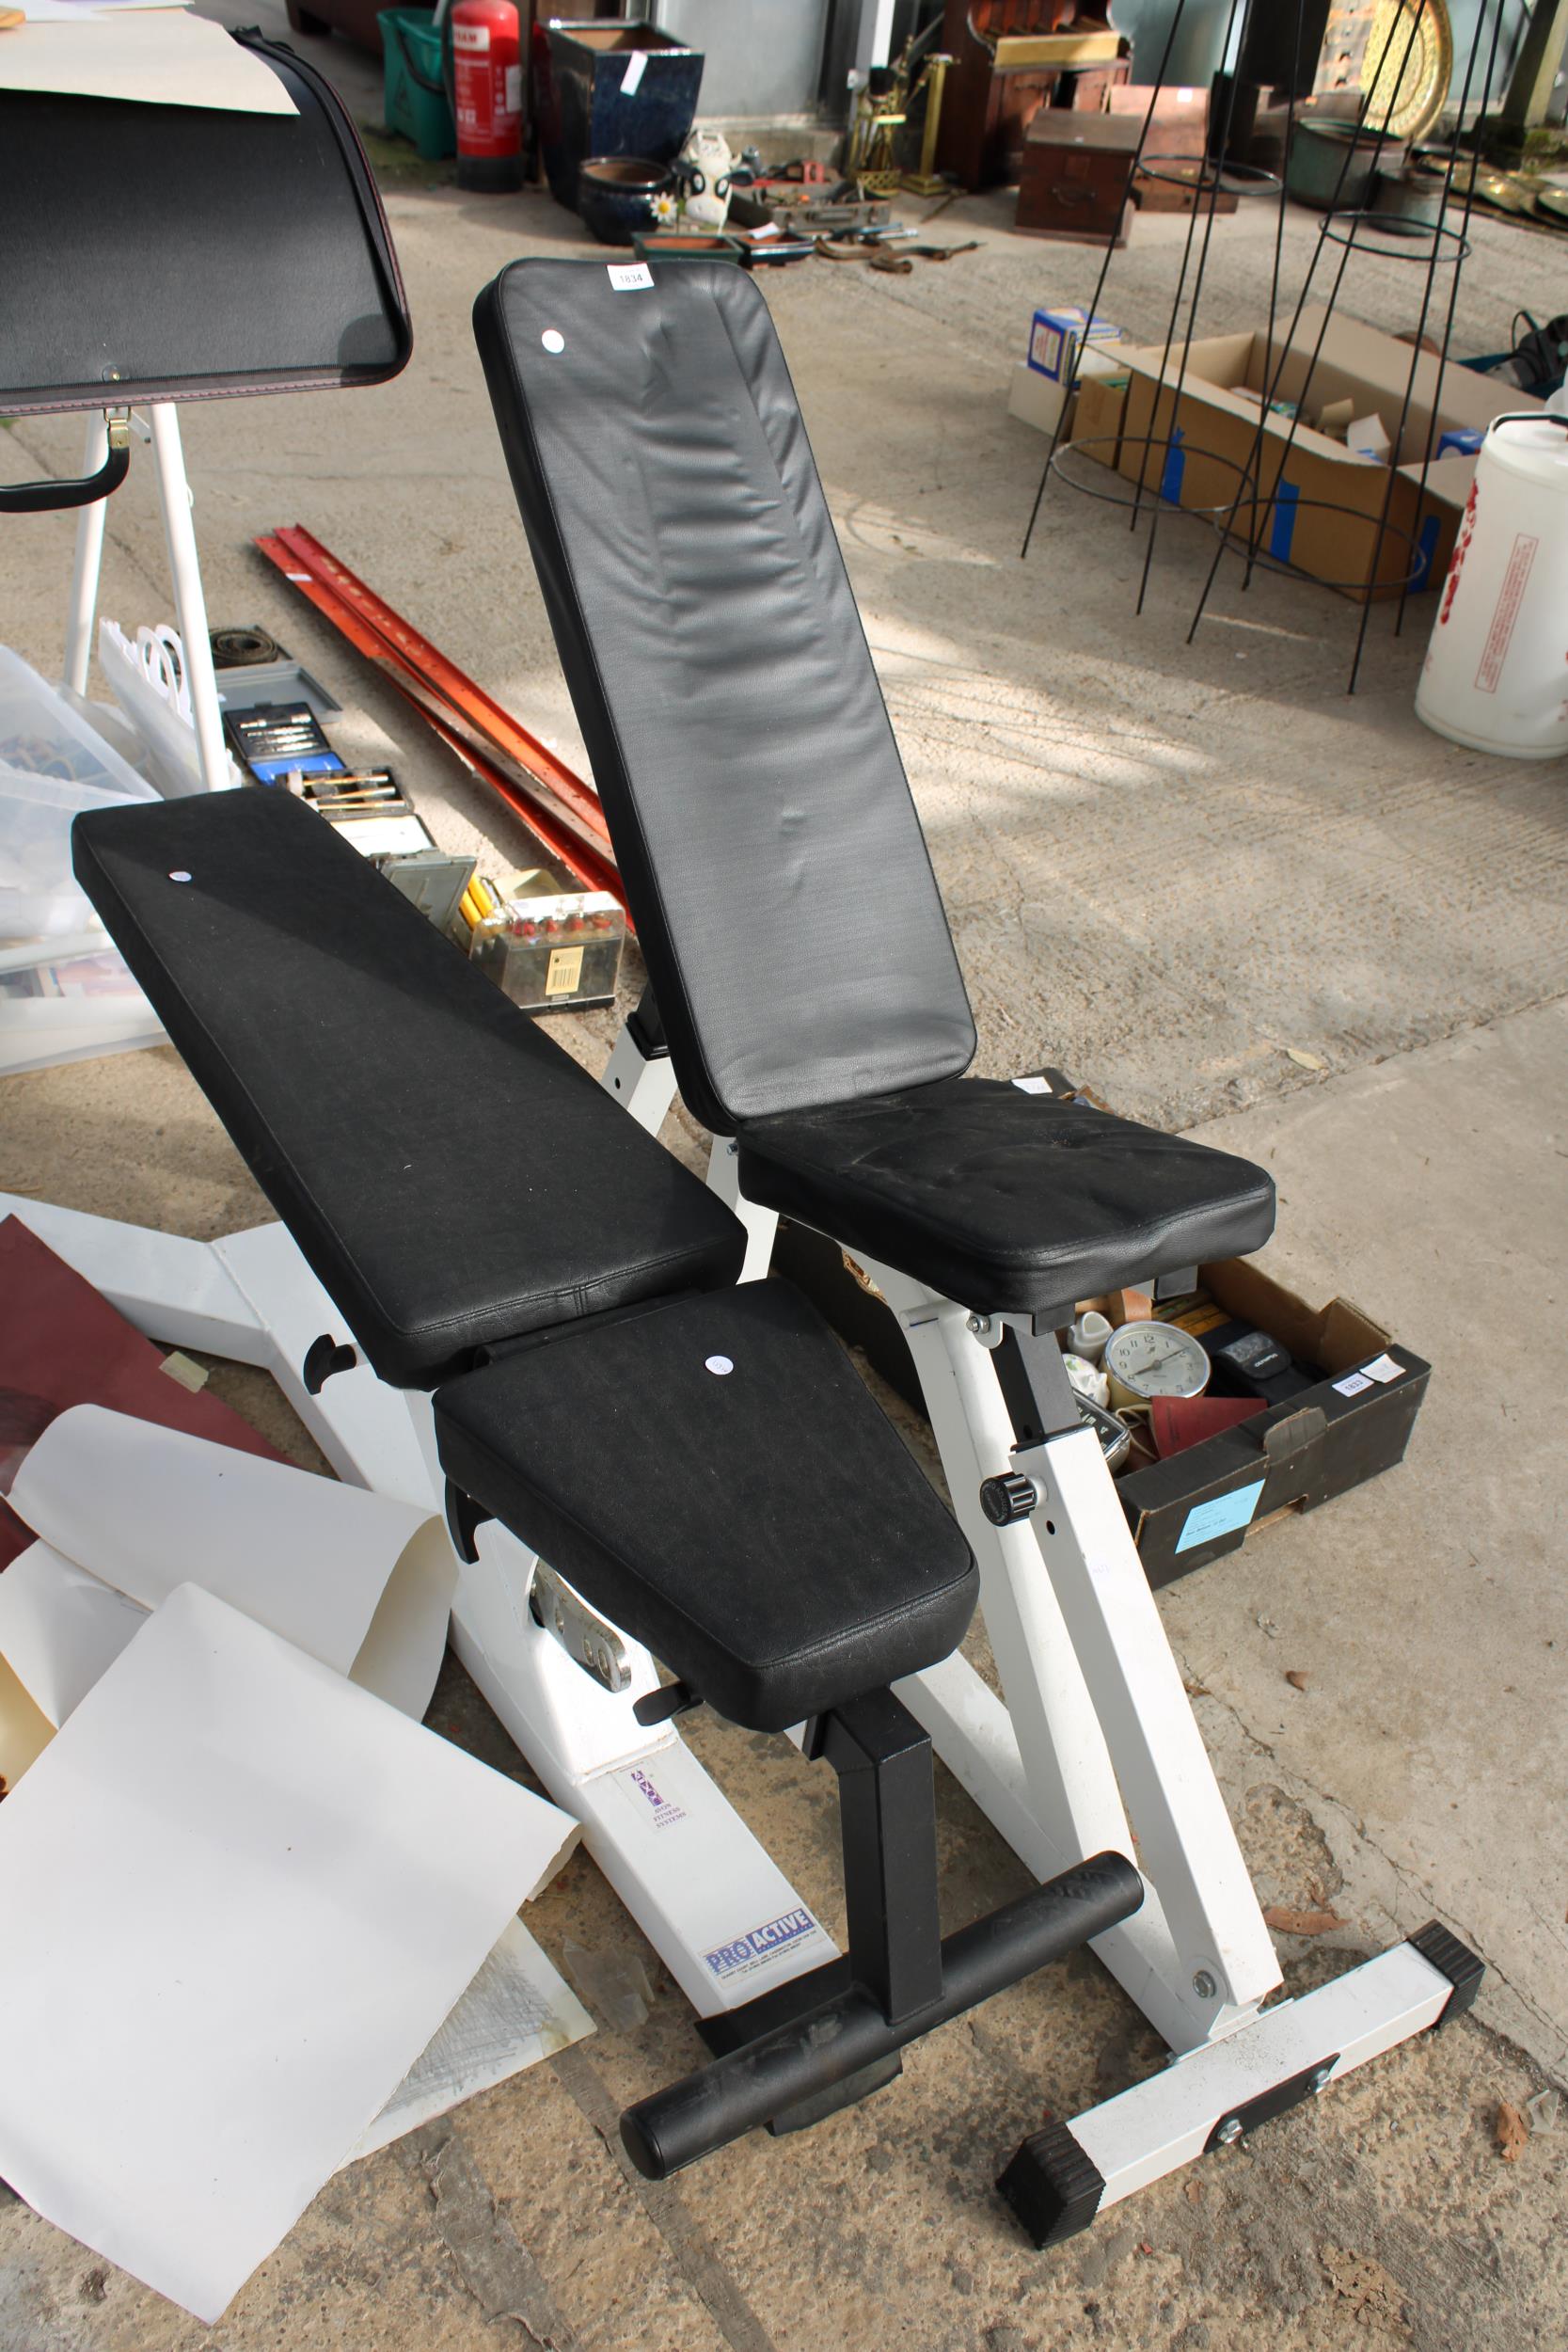 TWO WEIGHT LIFTING EXERCISE BENCHES